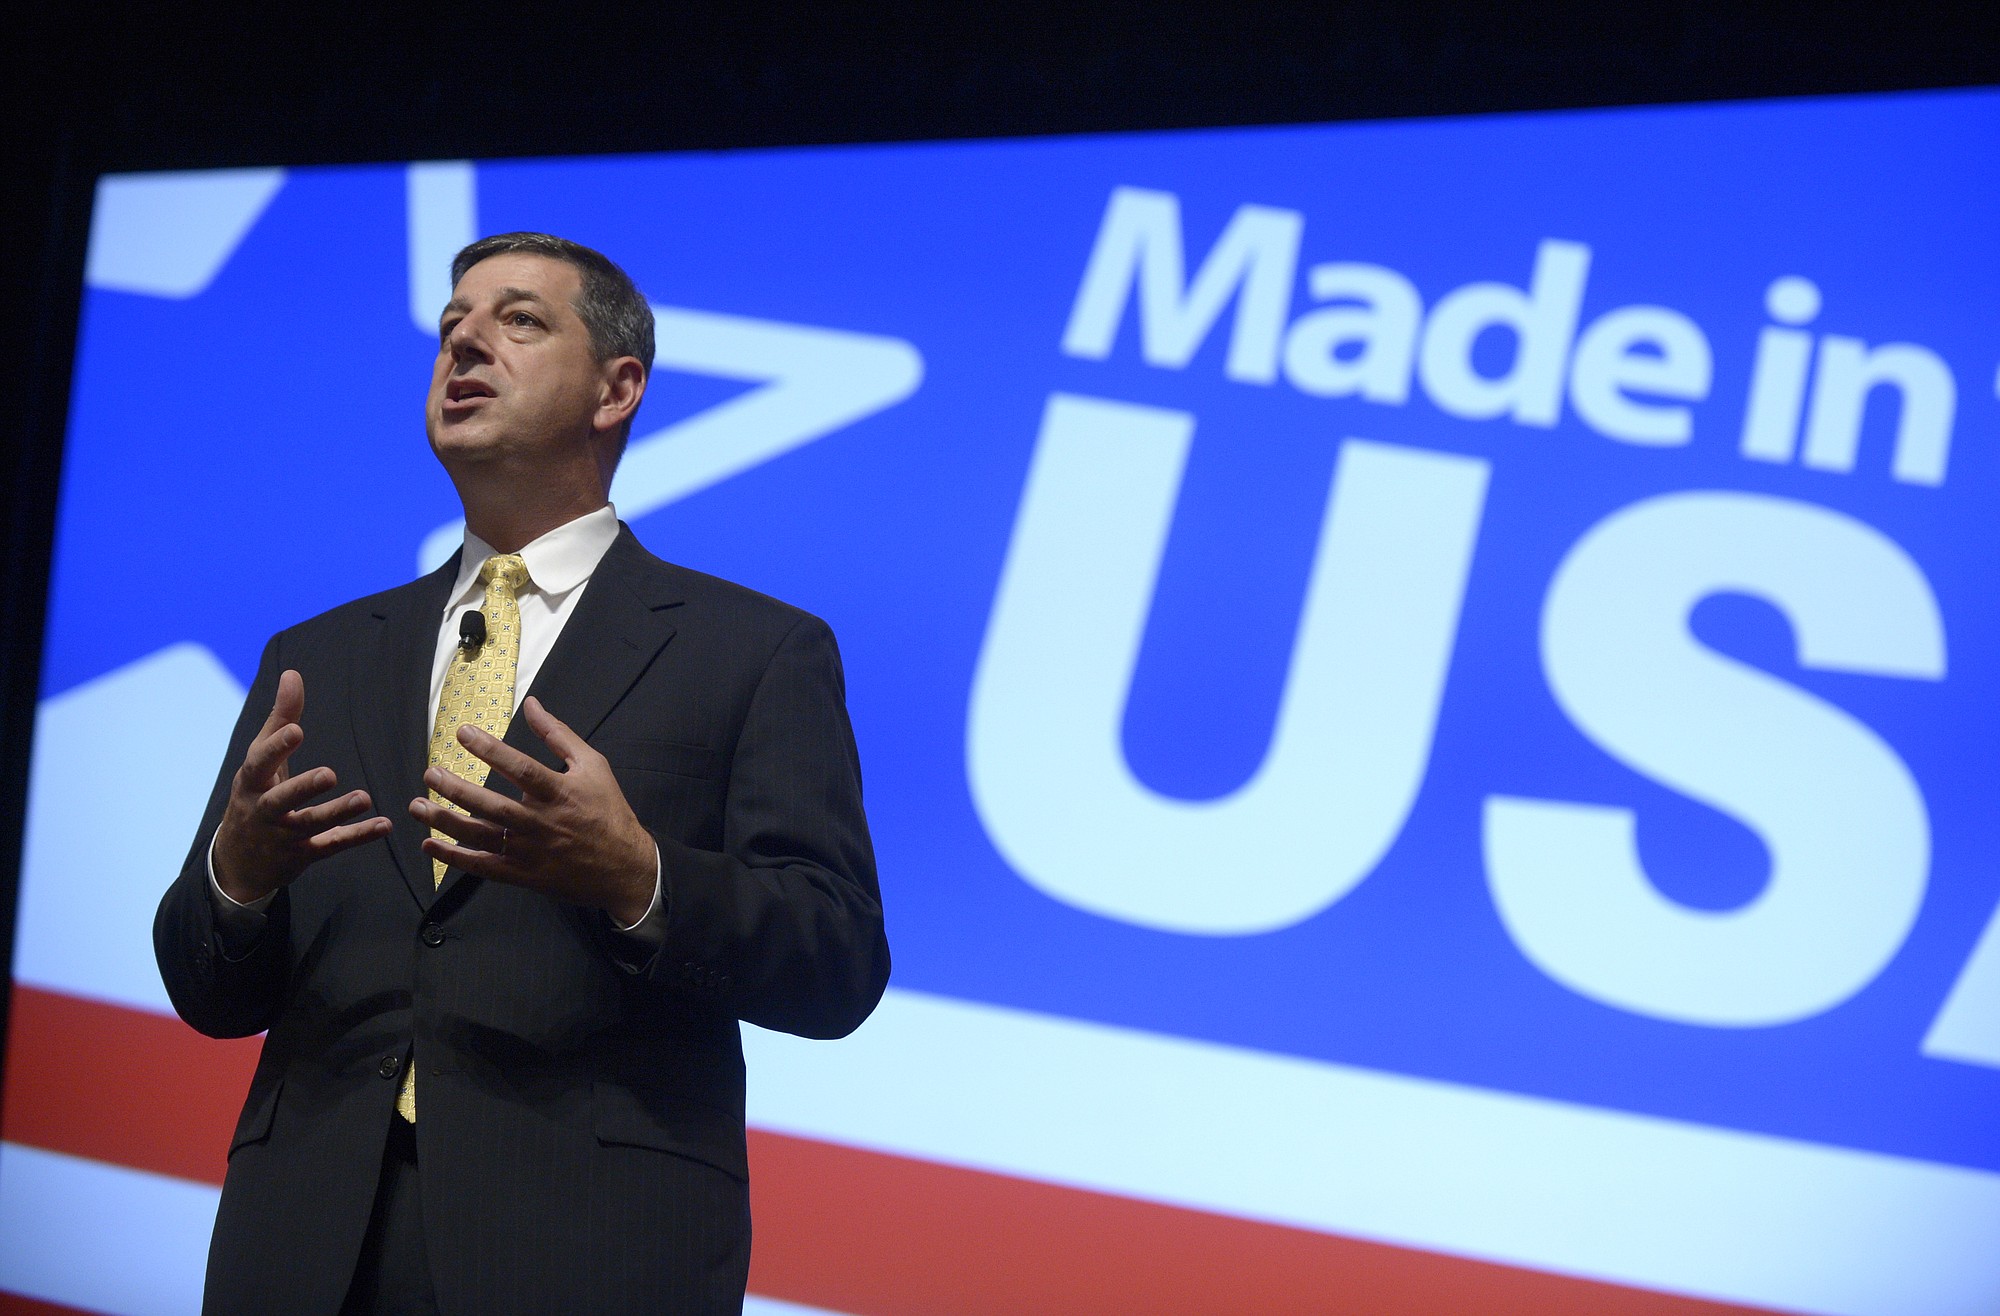 Wal-Mart U.S. President and CEO Bill Simon addresses attendees of the Wal-Mart U.S. Manufacturing Summit in August in Orlando, Fla.